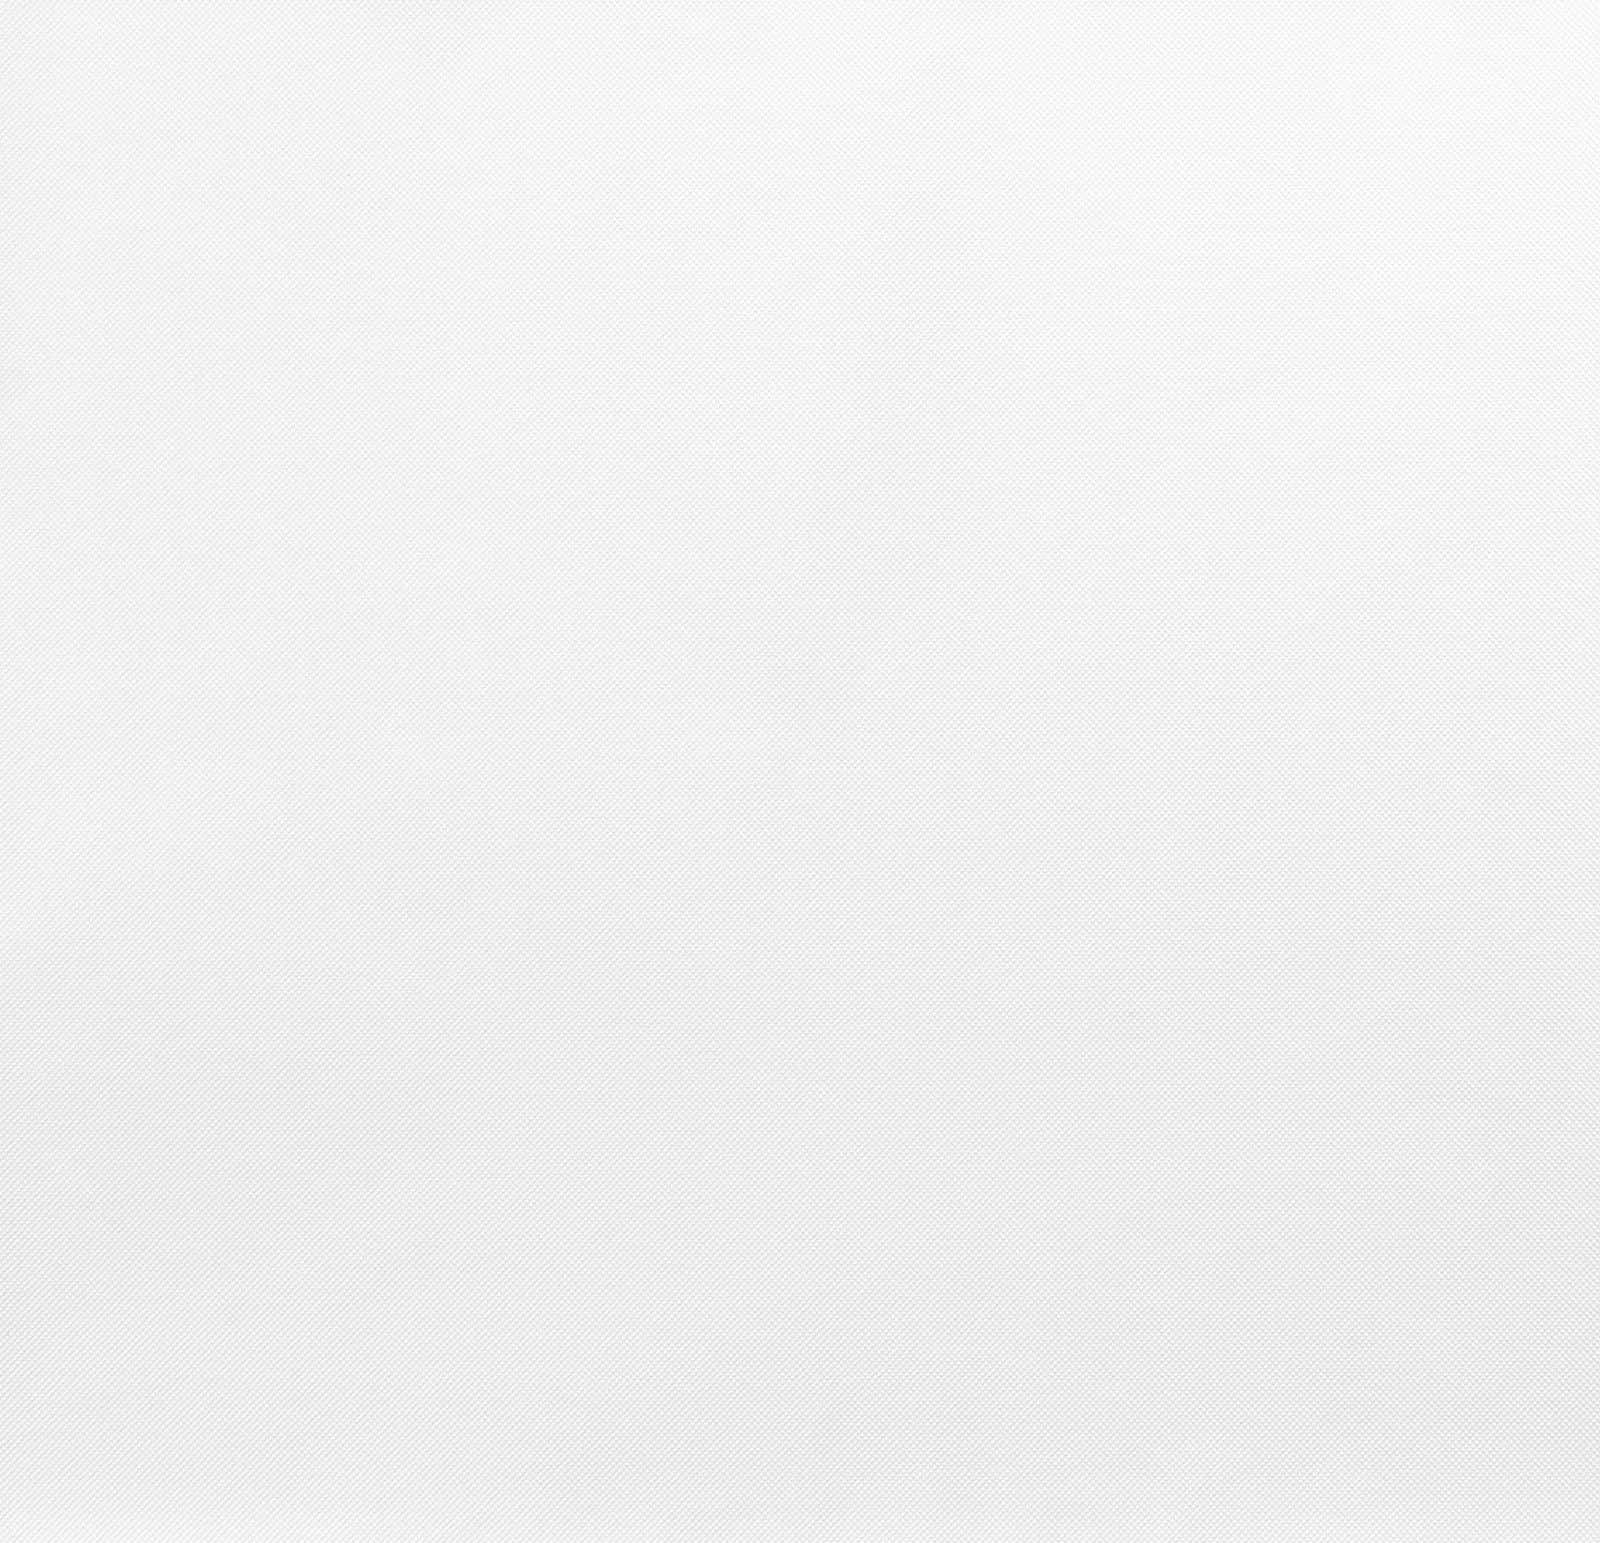 Pure White Solid Background